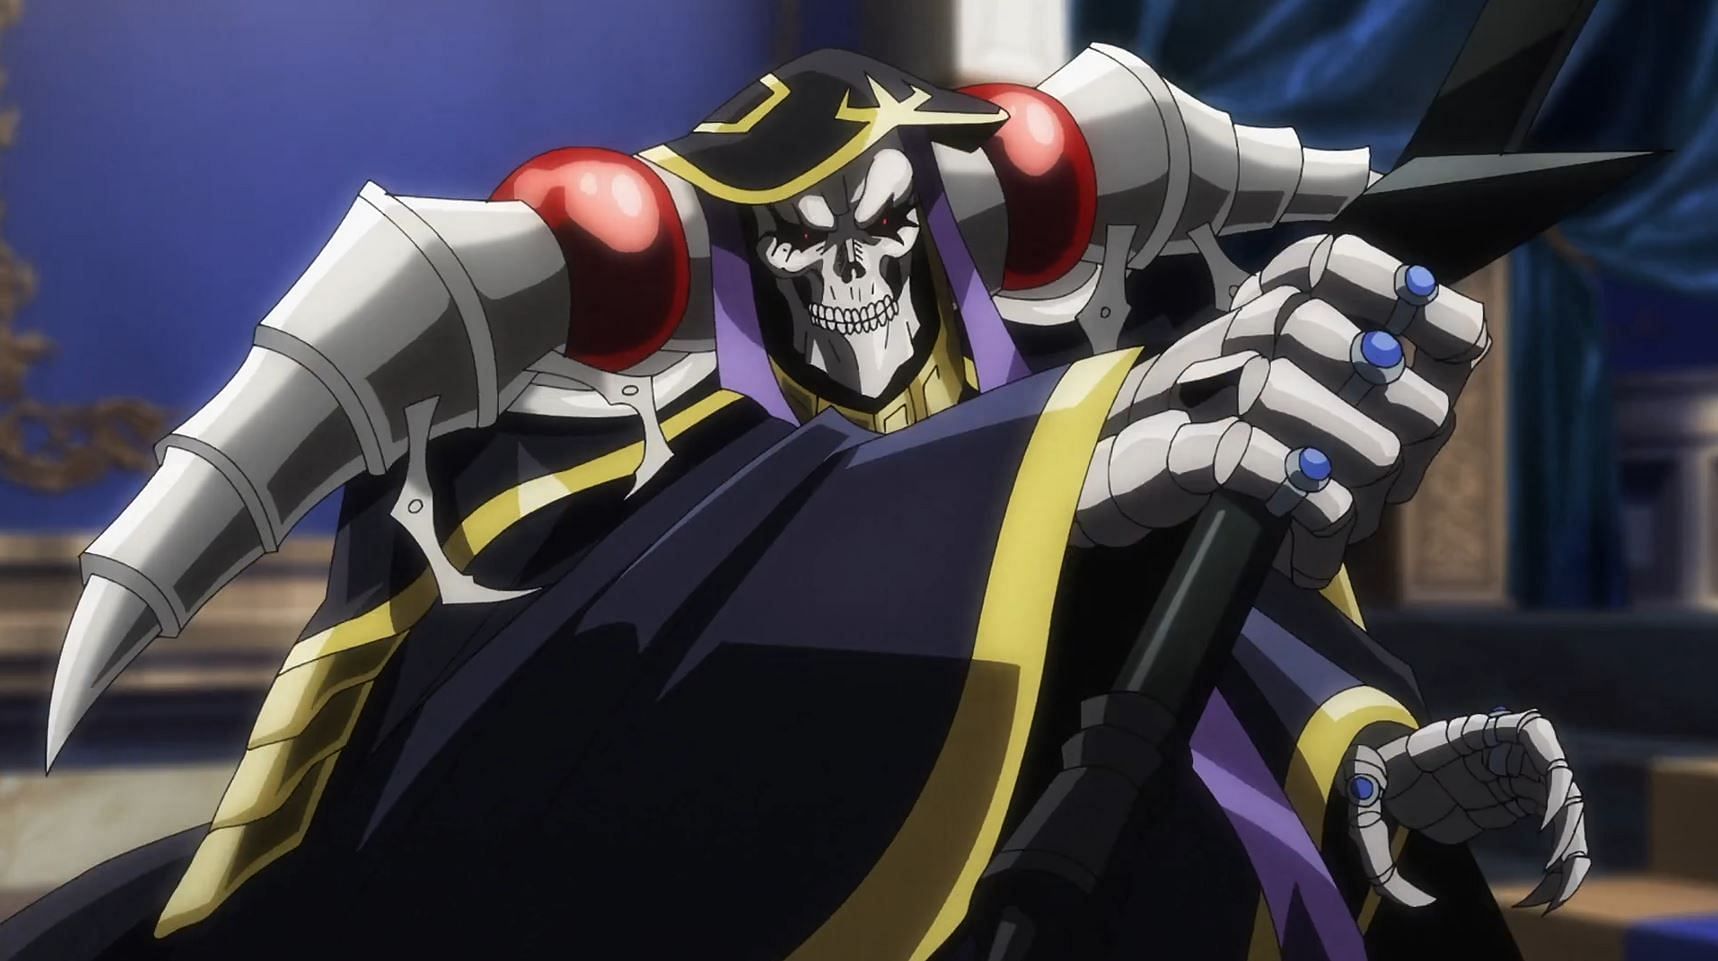 Sorcerer King Ainz Ooal Gown from Overlod IV (Image via Madhouse)